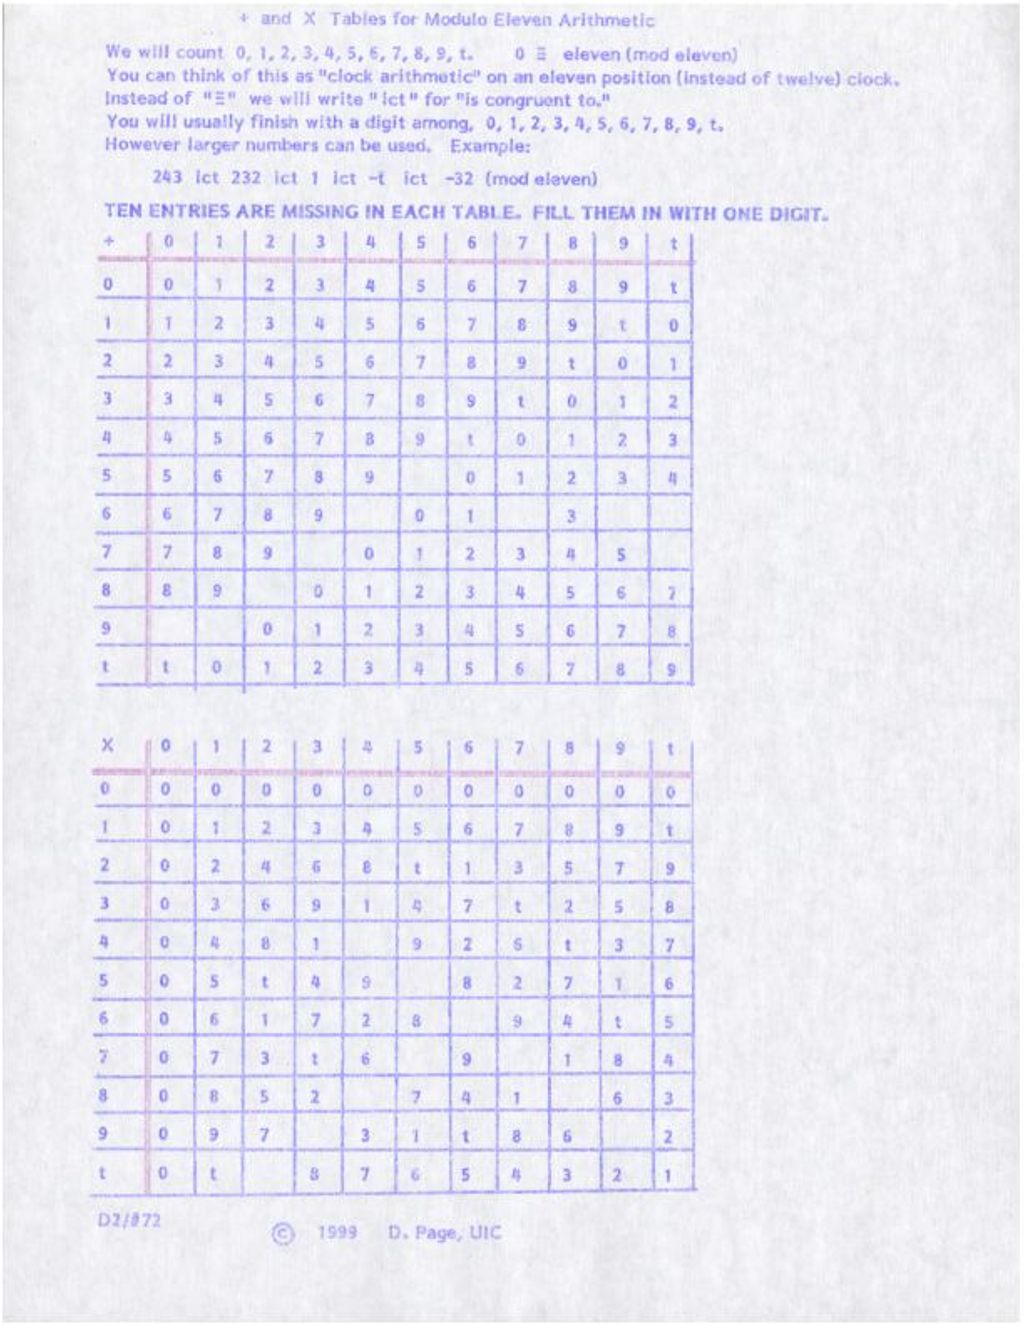 Miniature of "=+ and X Tables for Modulo Eleven Arithmetic (1999)"